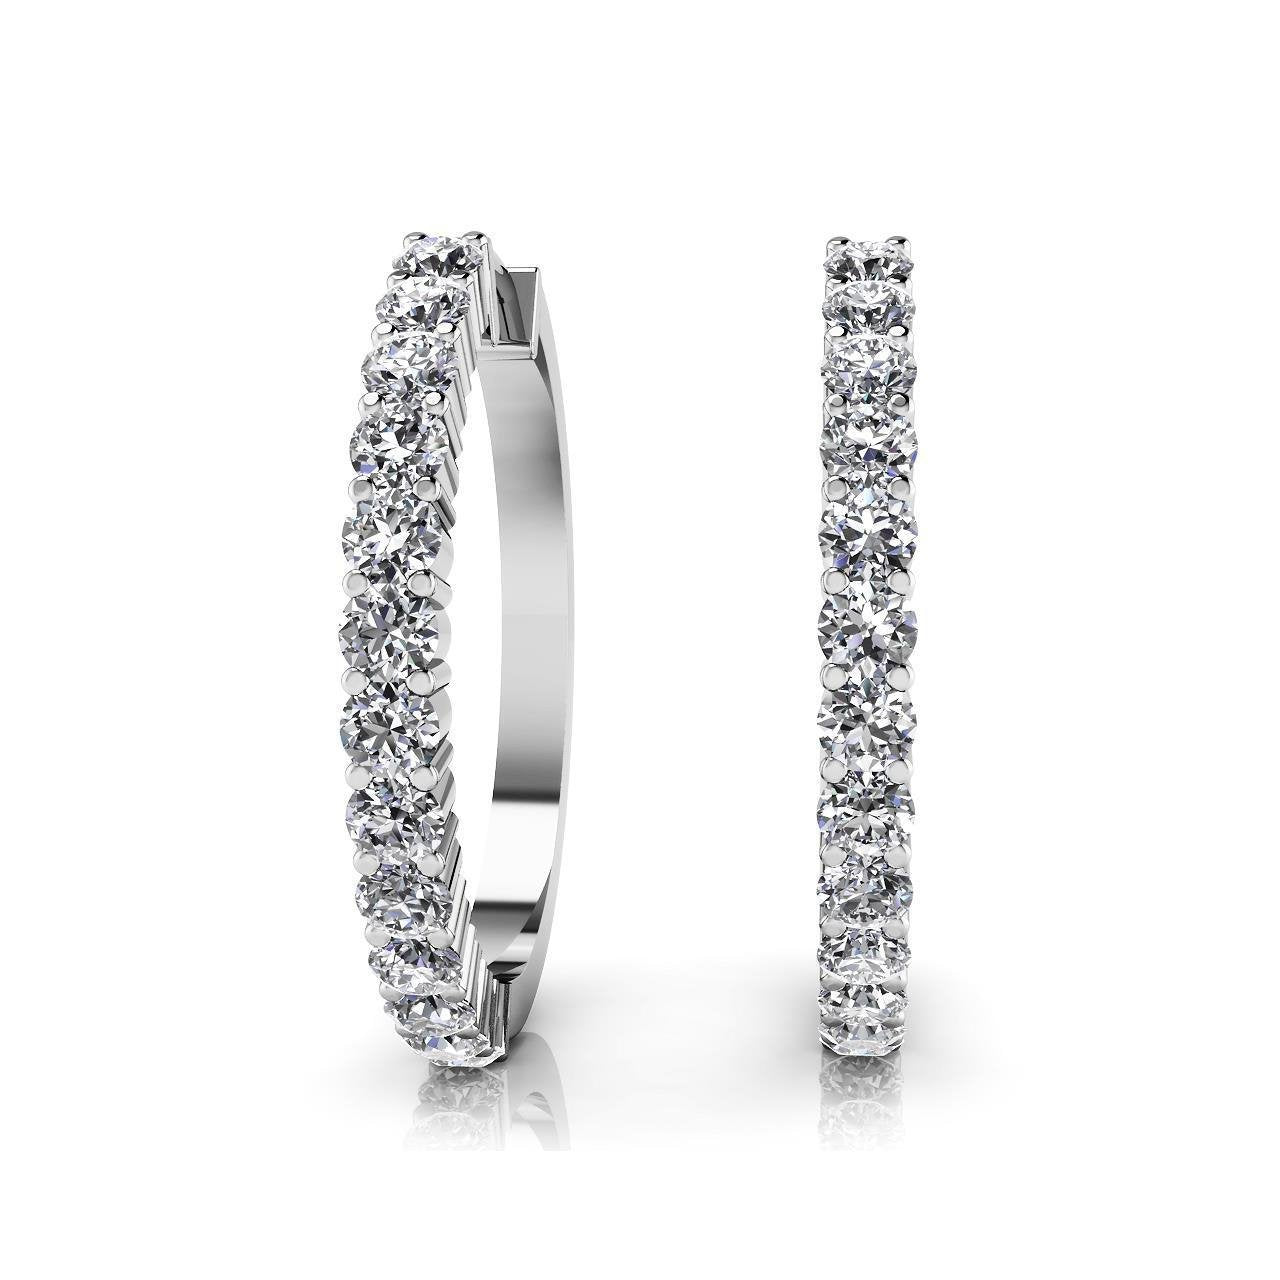 Must Have Hoop Genuine Diamonds Earrings Brilliant Cut White Gold 2 Ct Round